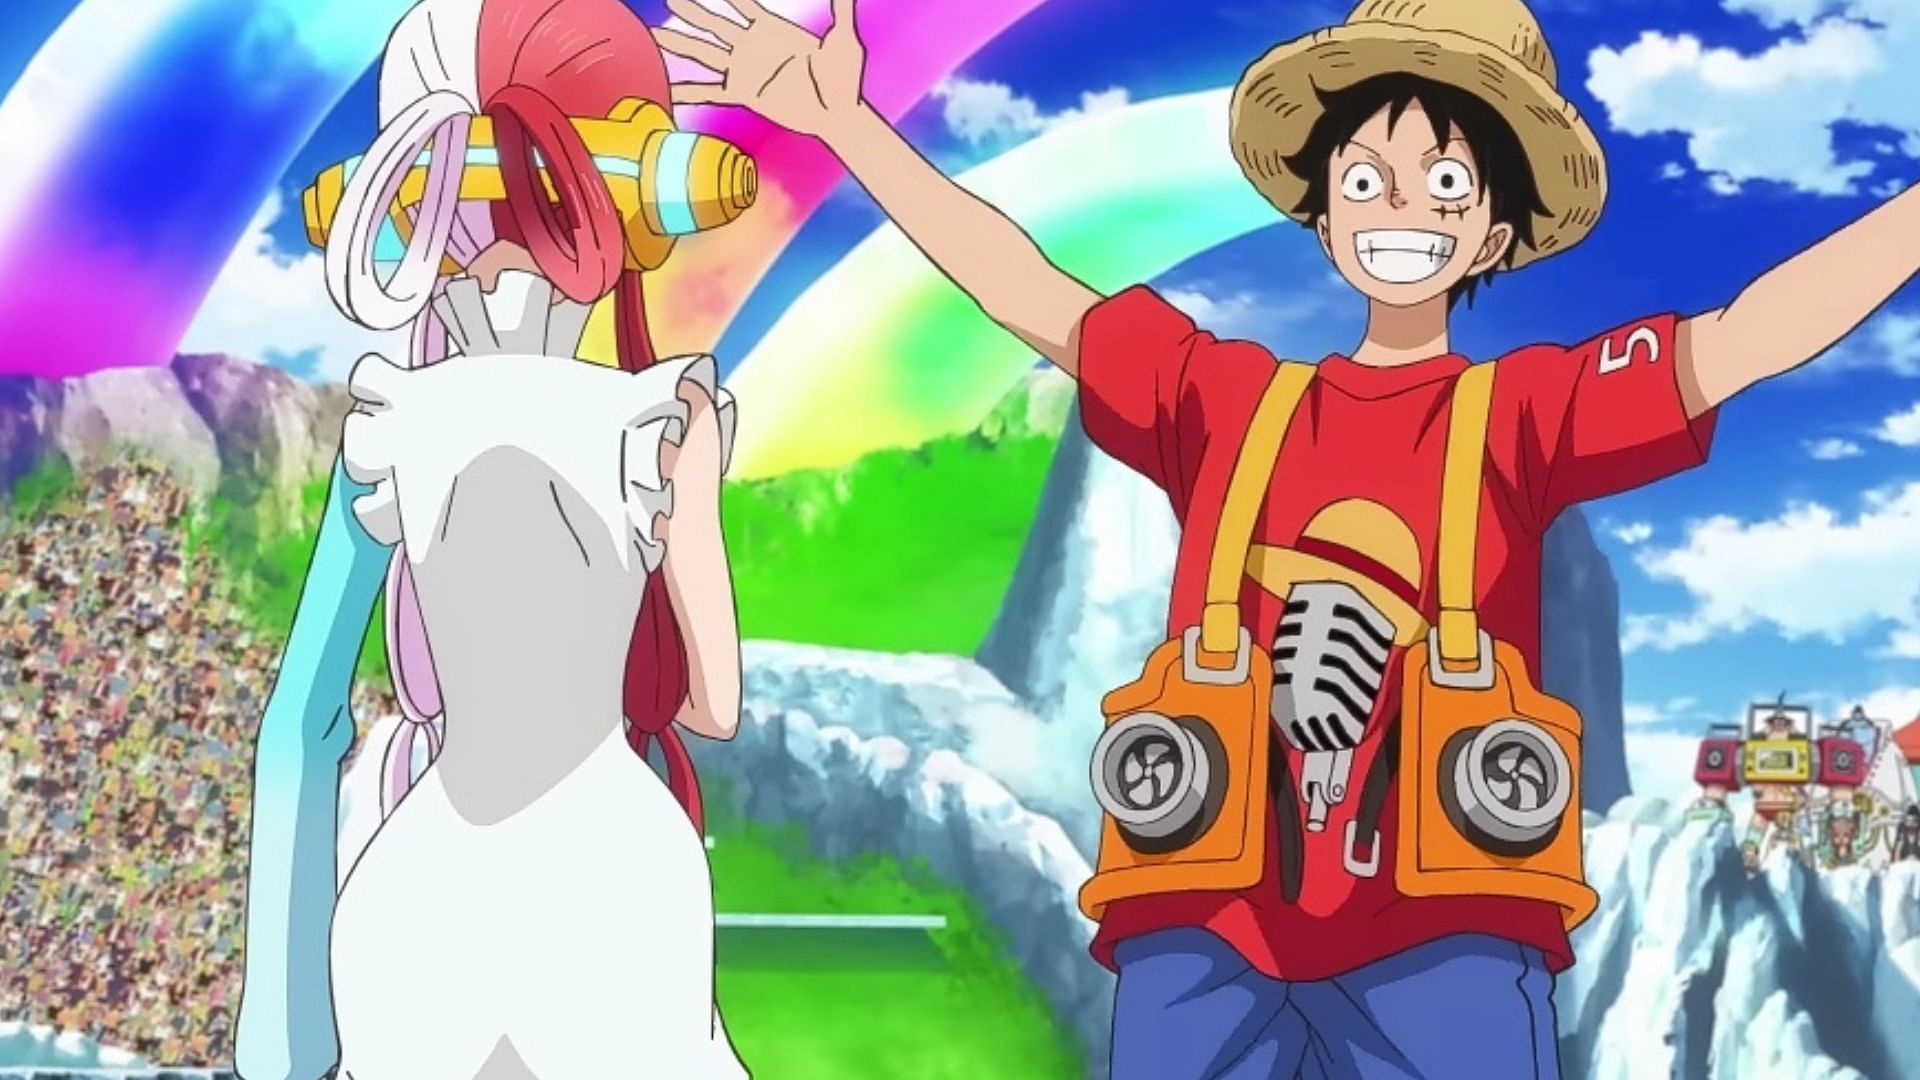 Luffy and Uta as seen in the film (Image via Toei Animation)